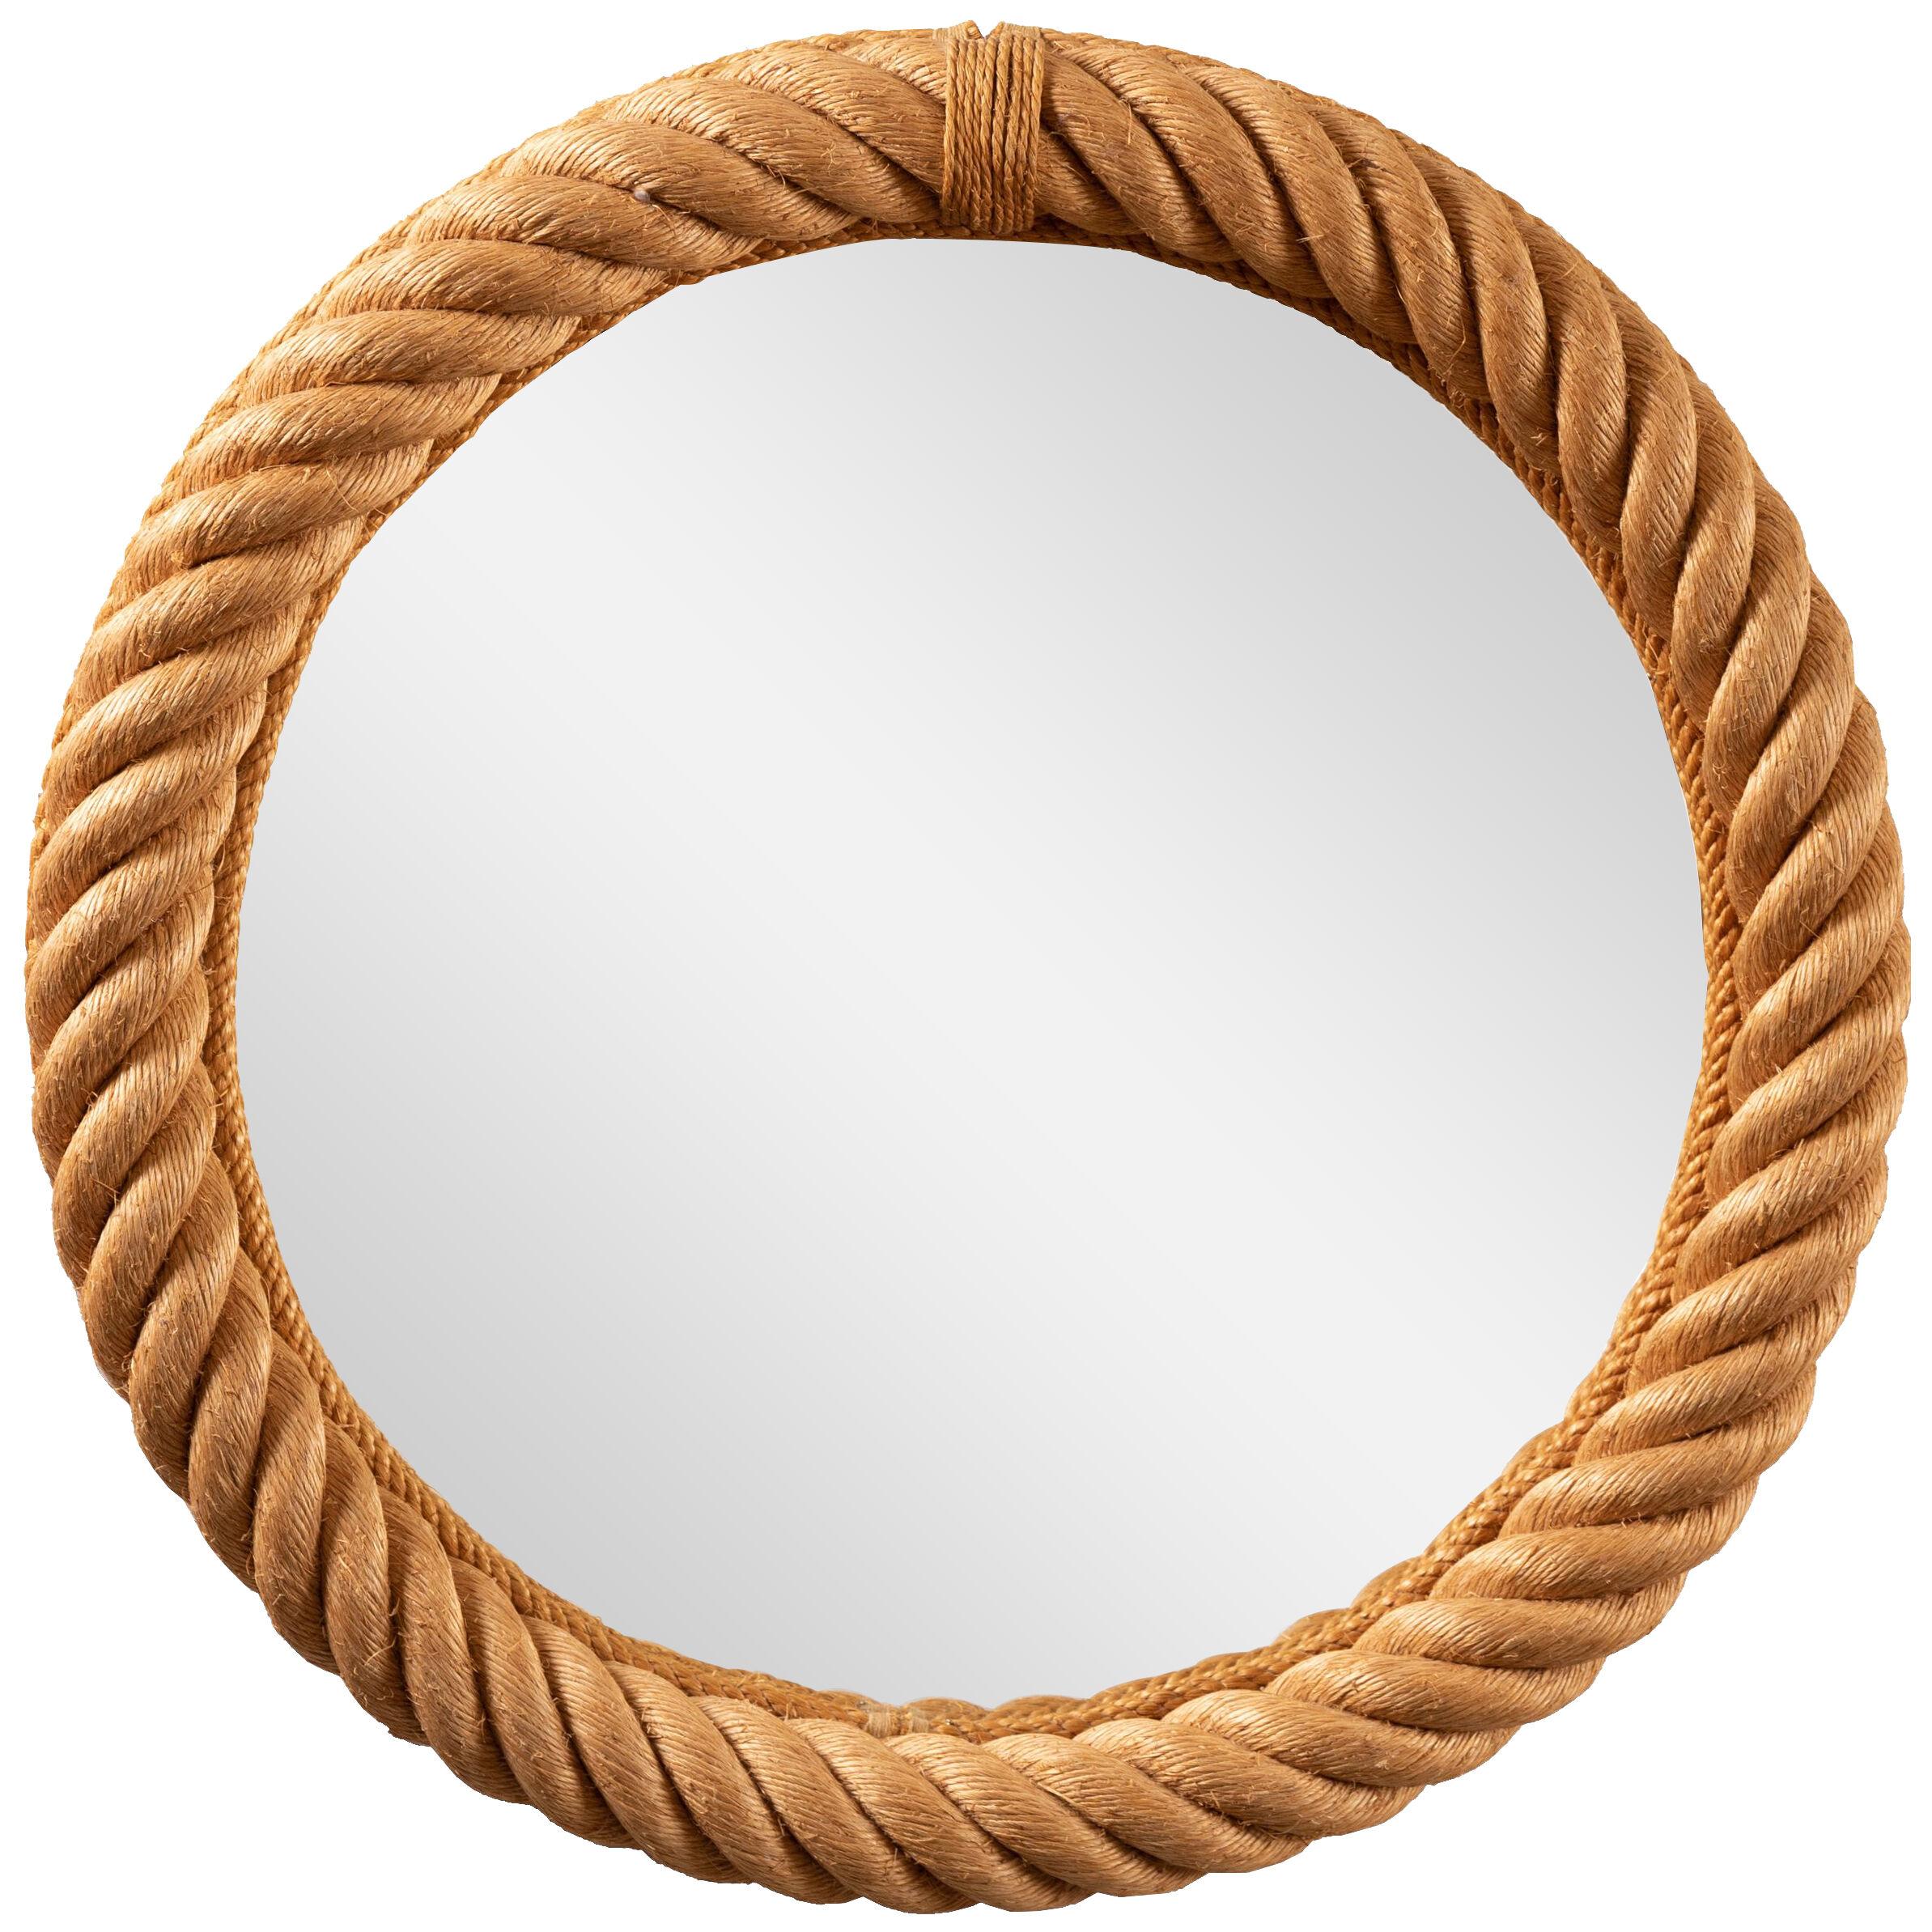 Rope Mirror by Audoux-Minet